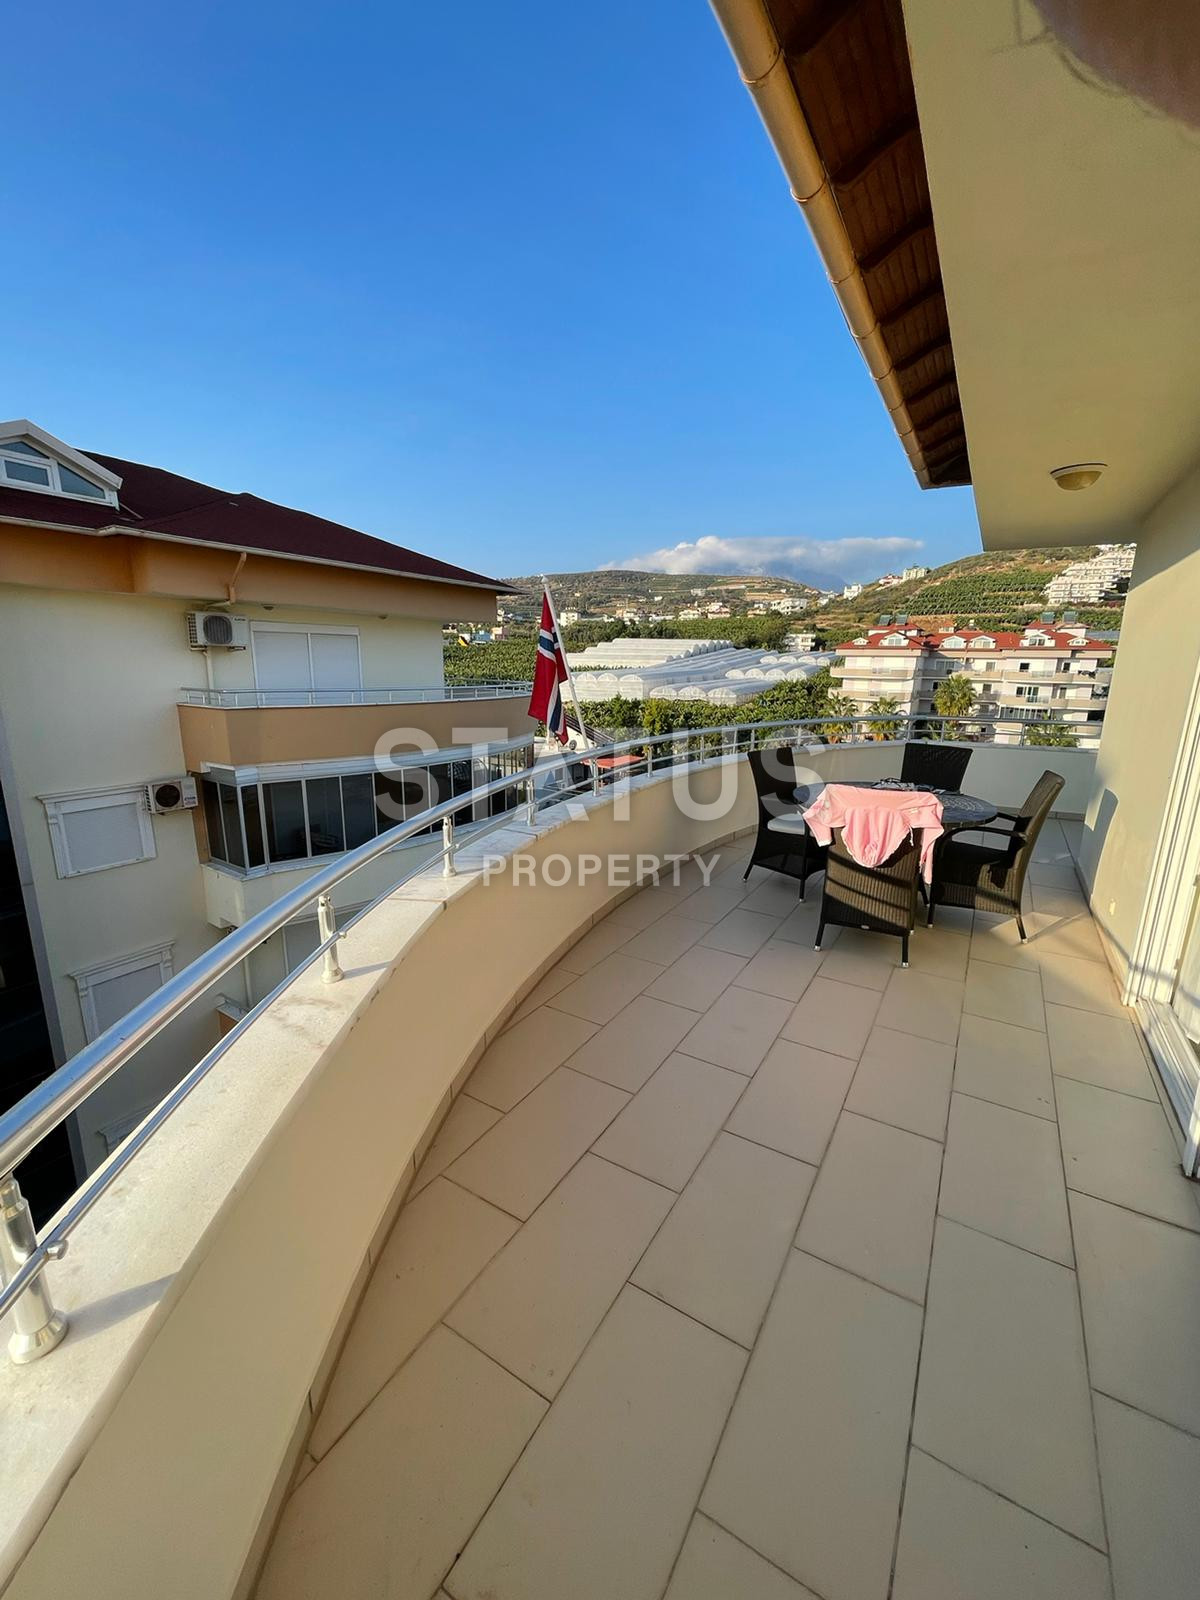 Penthouse 2+1 in a great quiet location at a bargain price. 205m2 фото 2